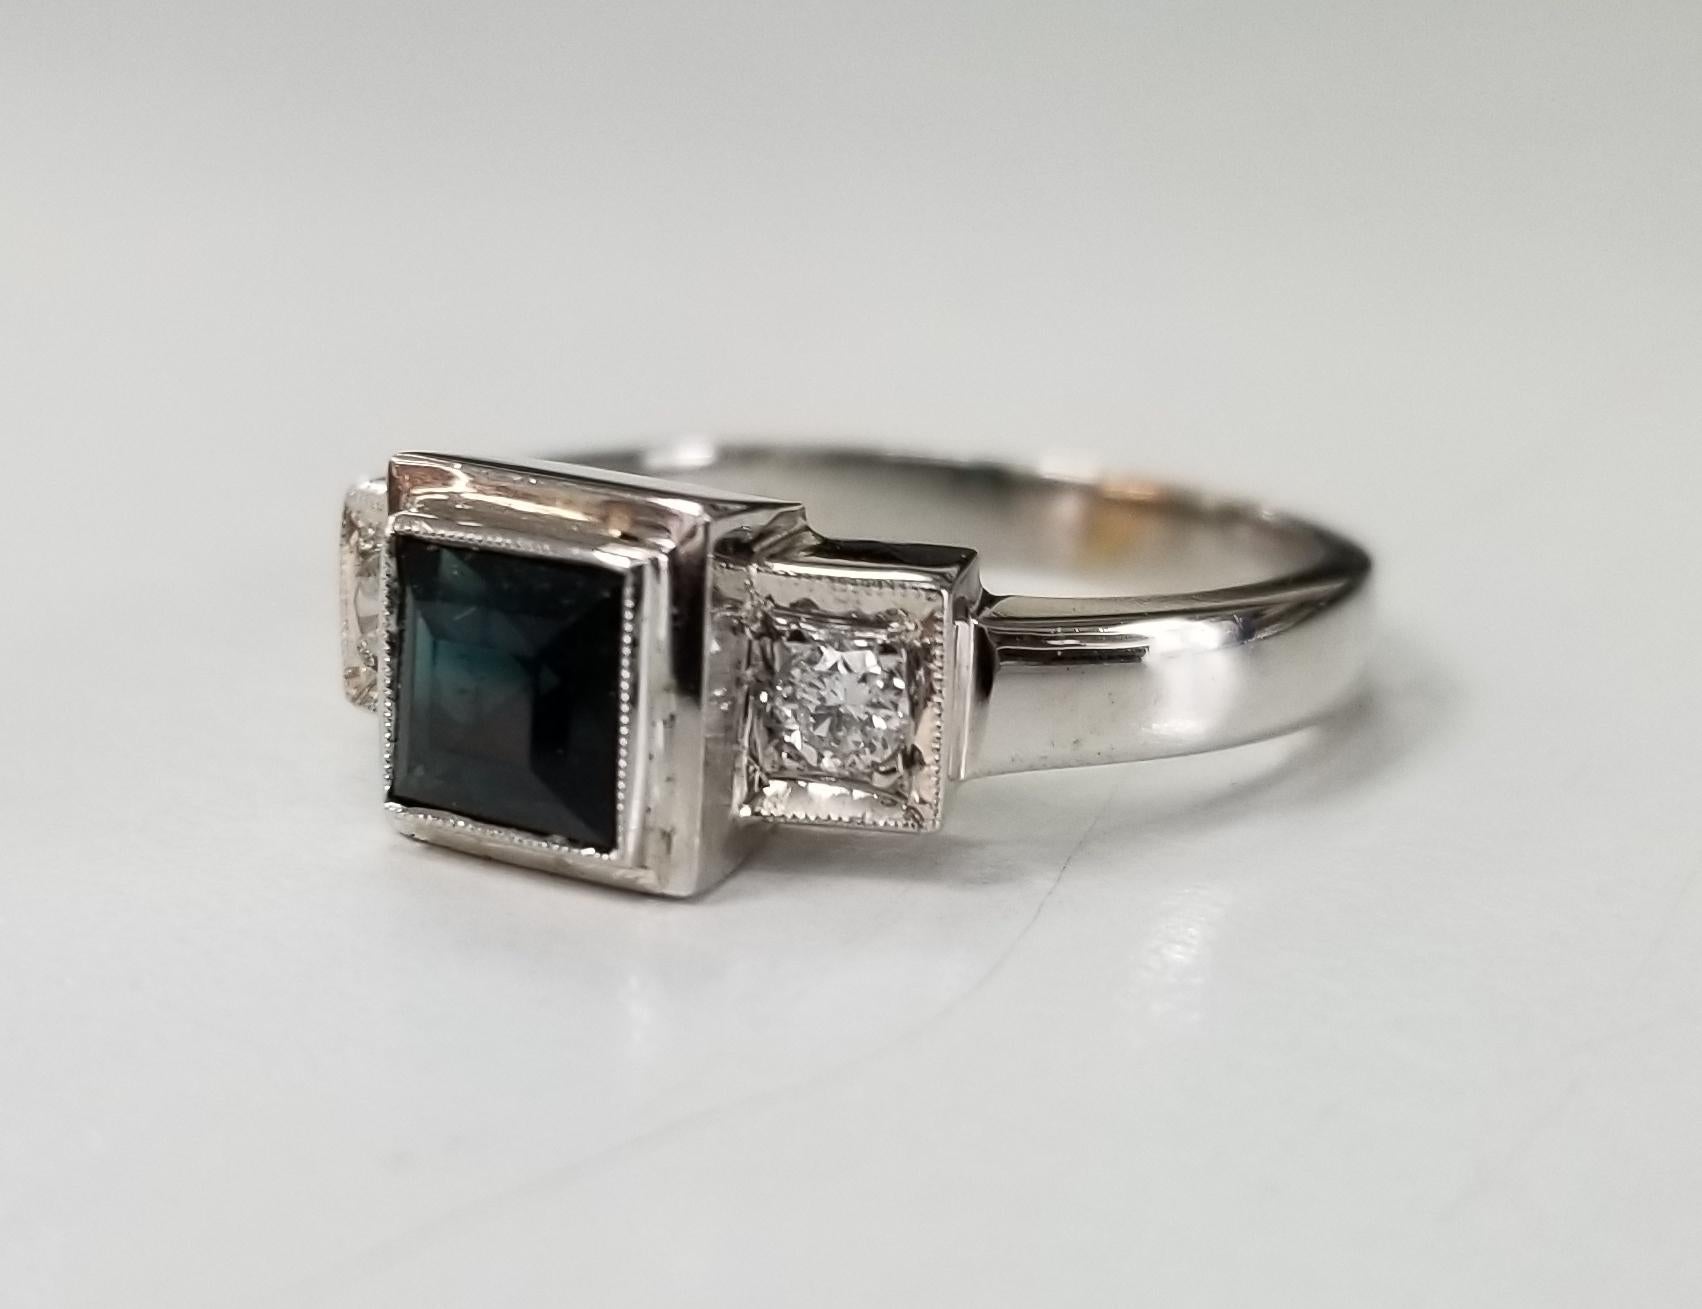 14k white gold Tourmaline and diamond ring, containing 1 square cut tourmaline weighing .68pts. and 2 round full cut diamonds of very fine quality weighing .14pts.  This ring is a size 7 but we will size to fit for free.